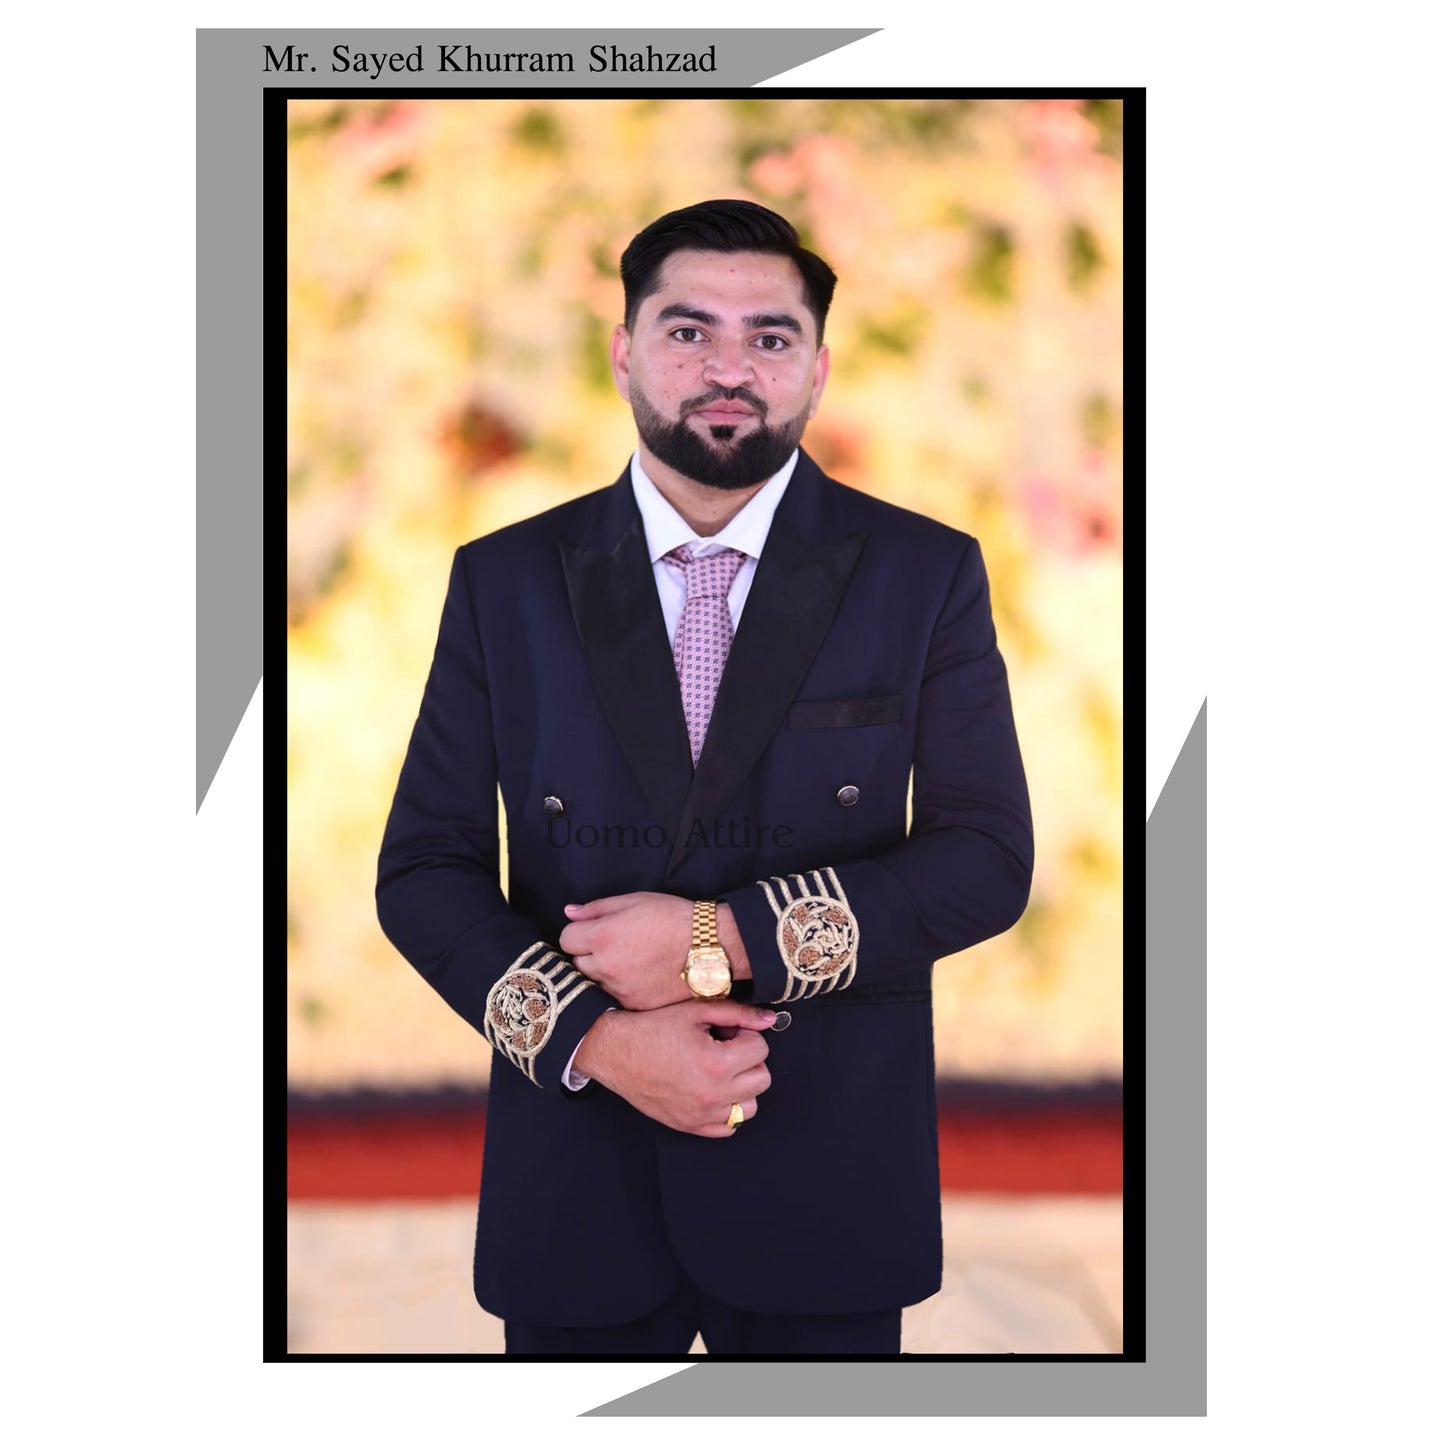 Meet our happy client Mr. Sayed Khurram Shahzad in Customized Navy Blue Tuxedo Suit